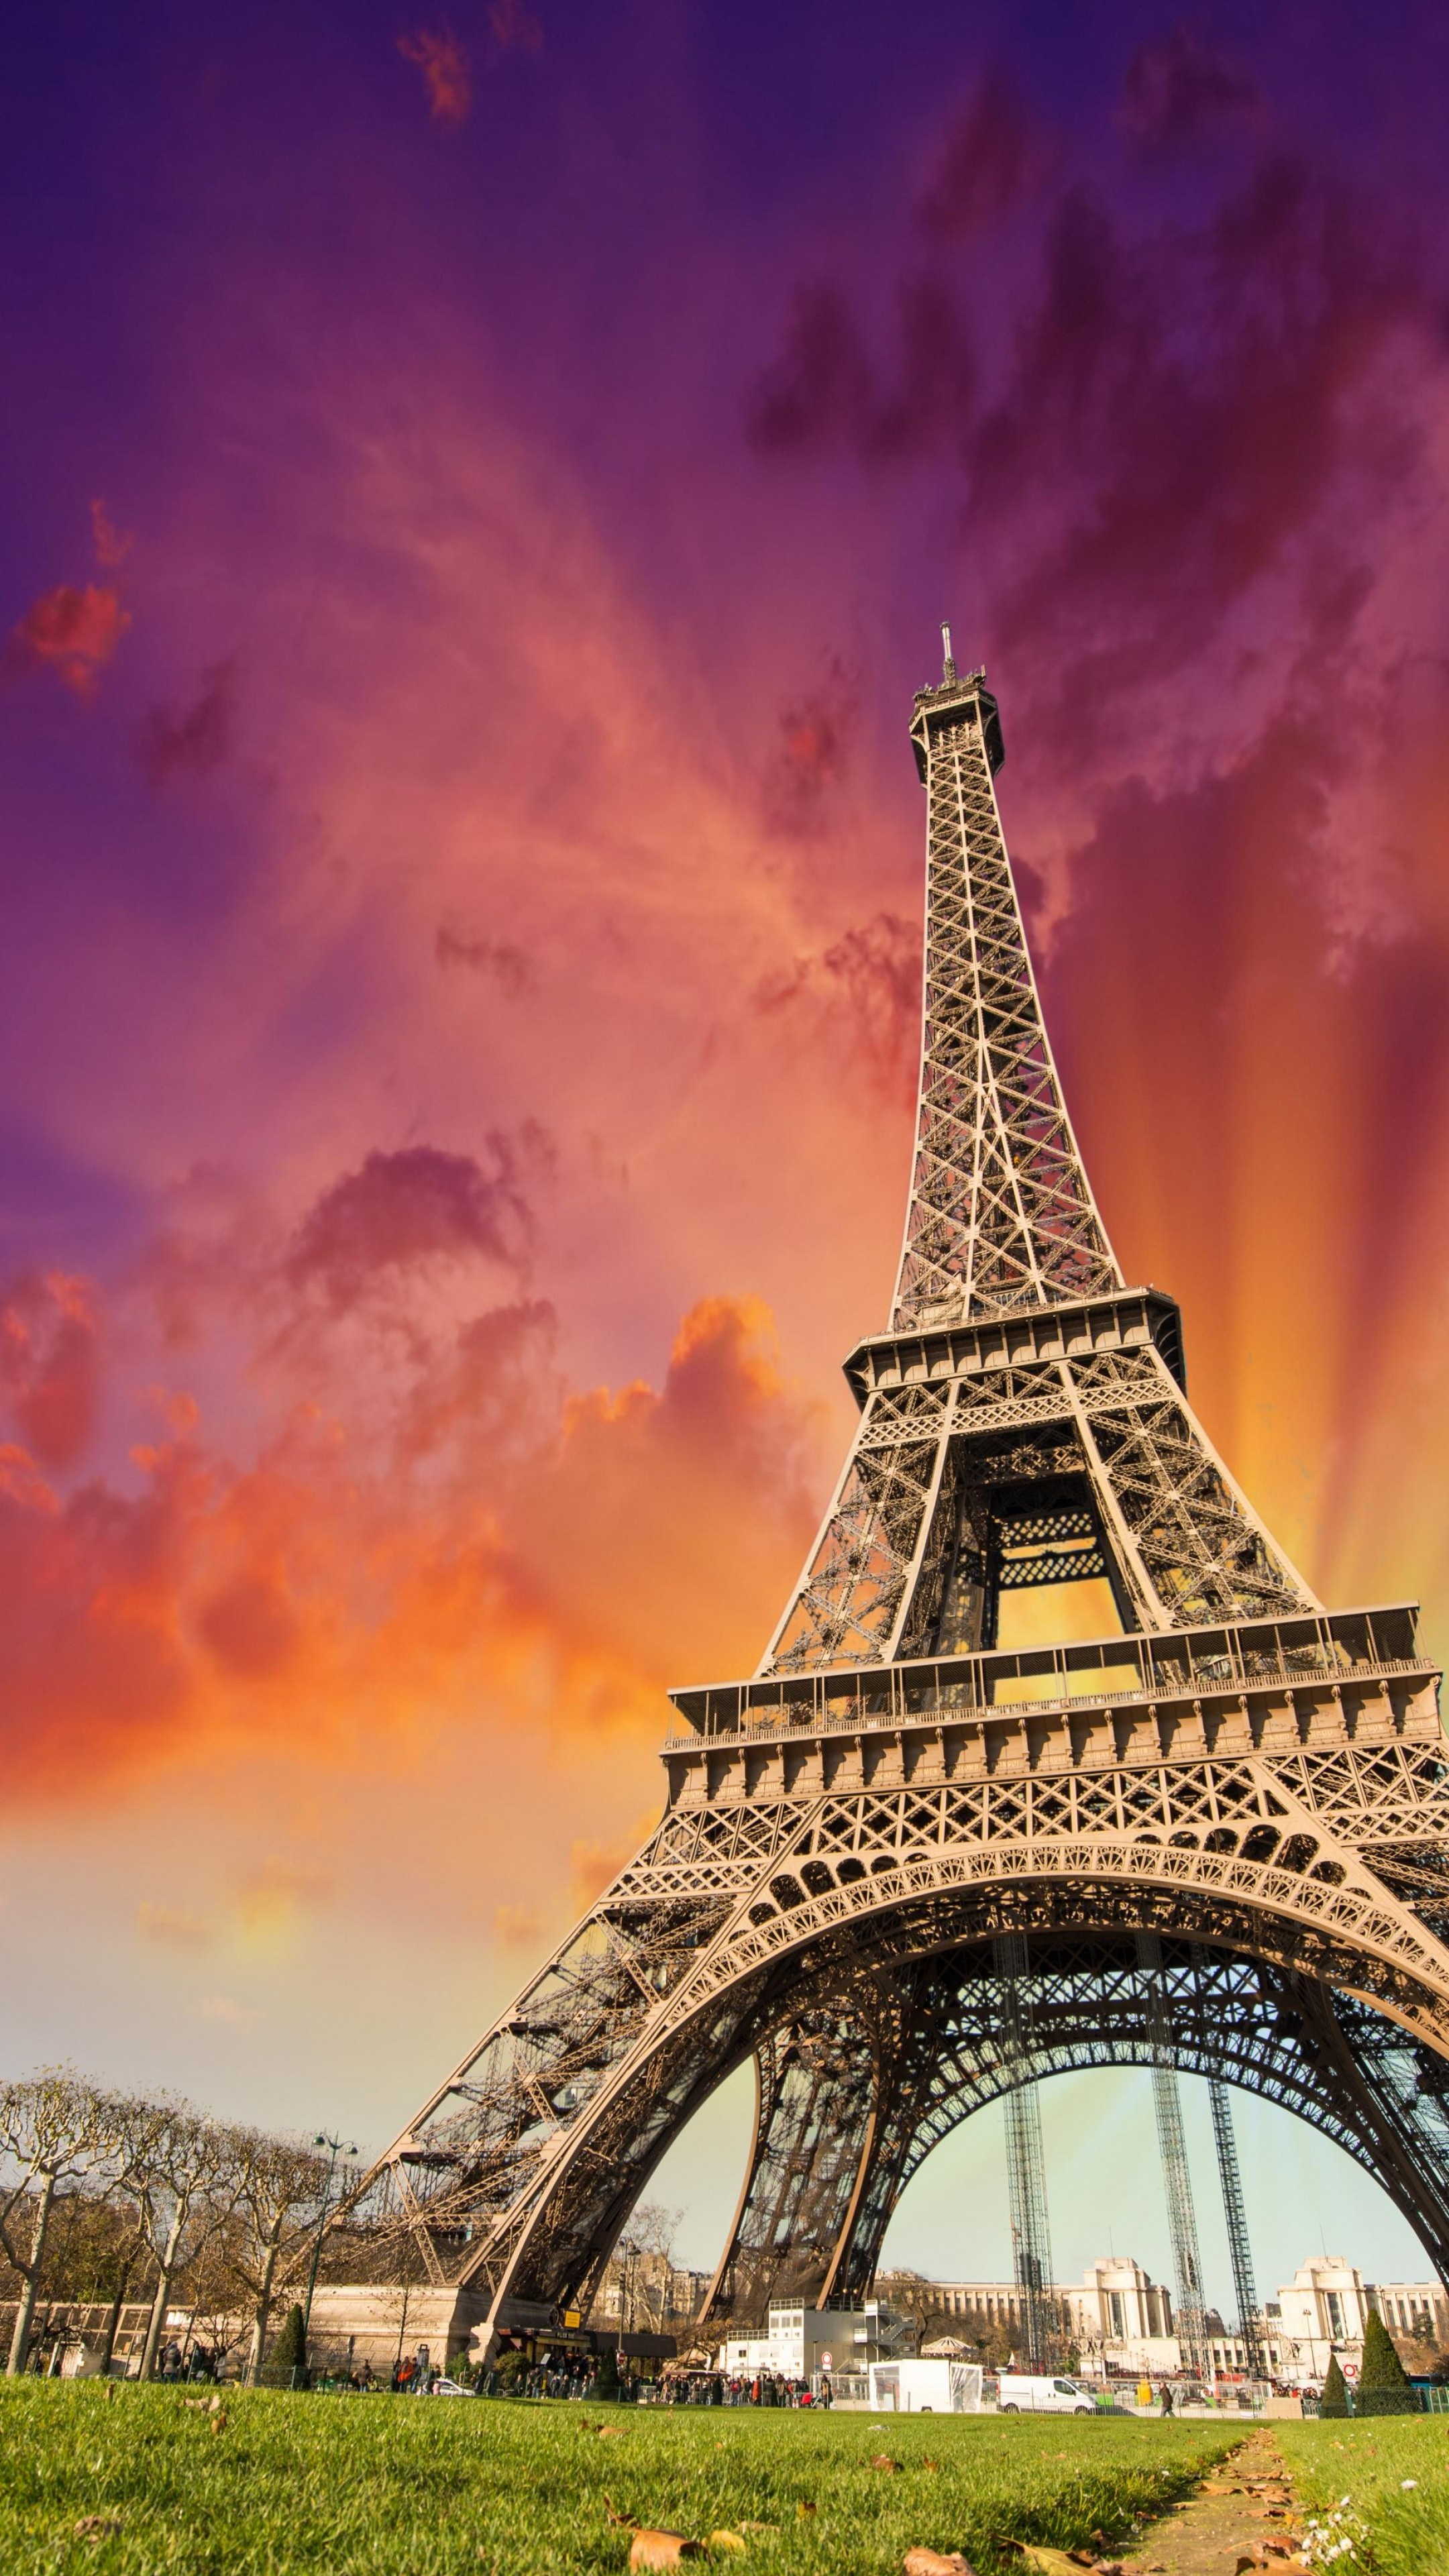 Paris: France's capital, A major European city and a global center for art, fashion, gastronomy and culture. 2160x3840 4K Wallpaper.